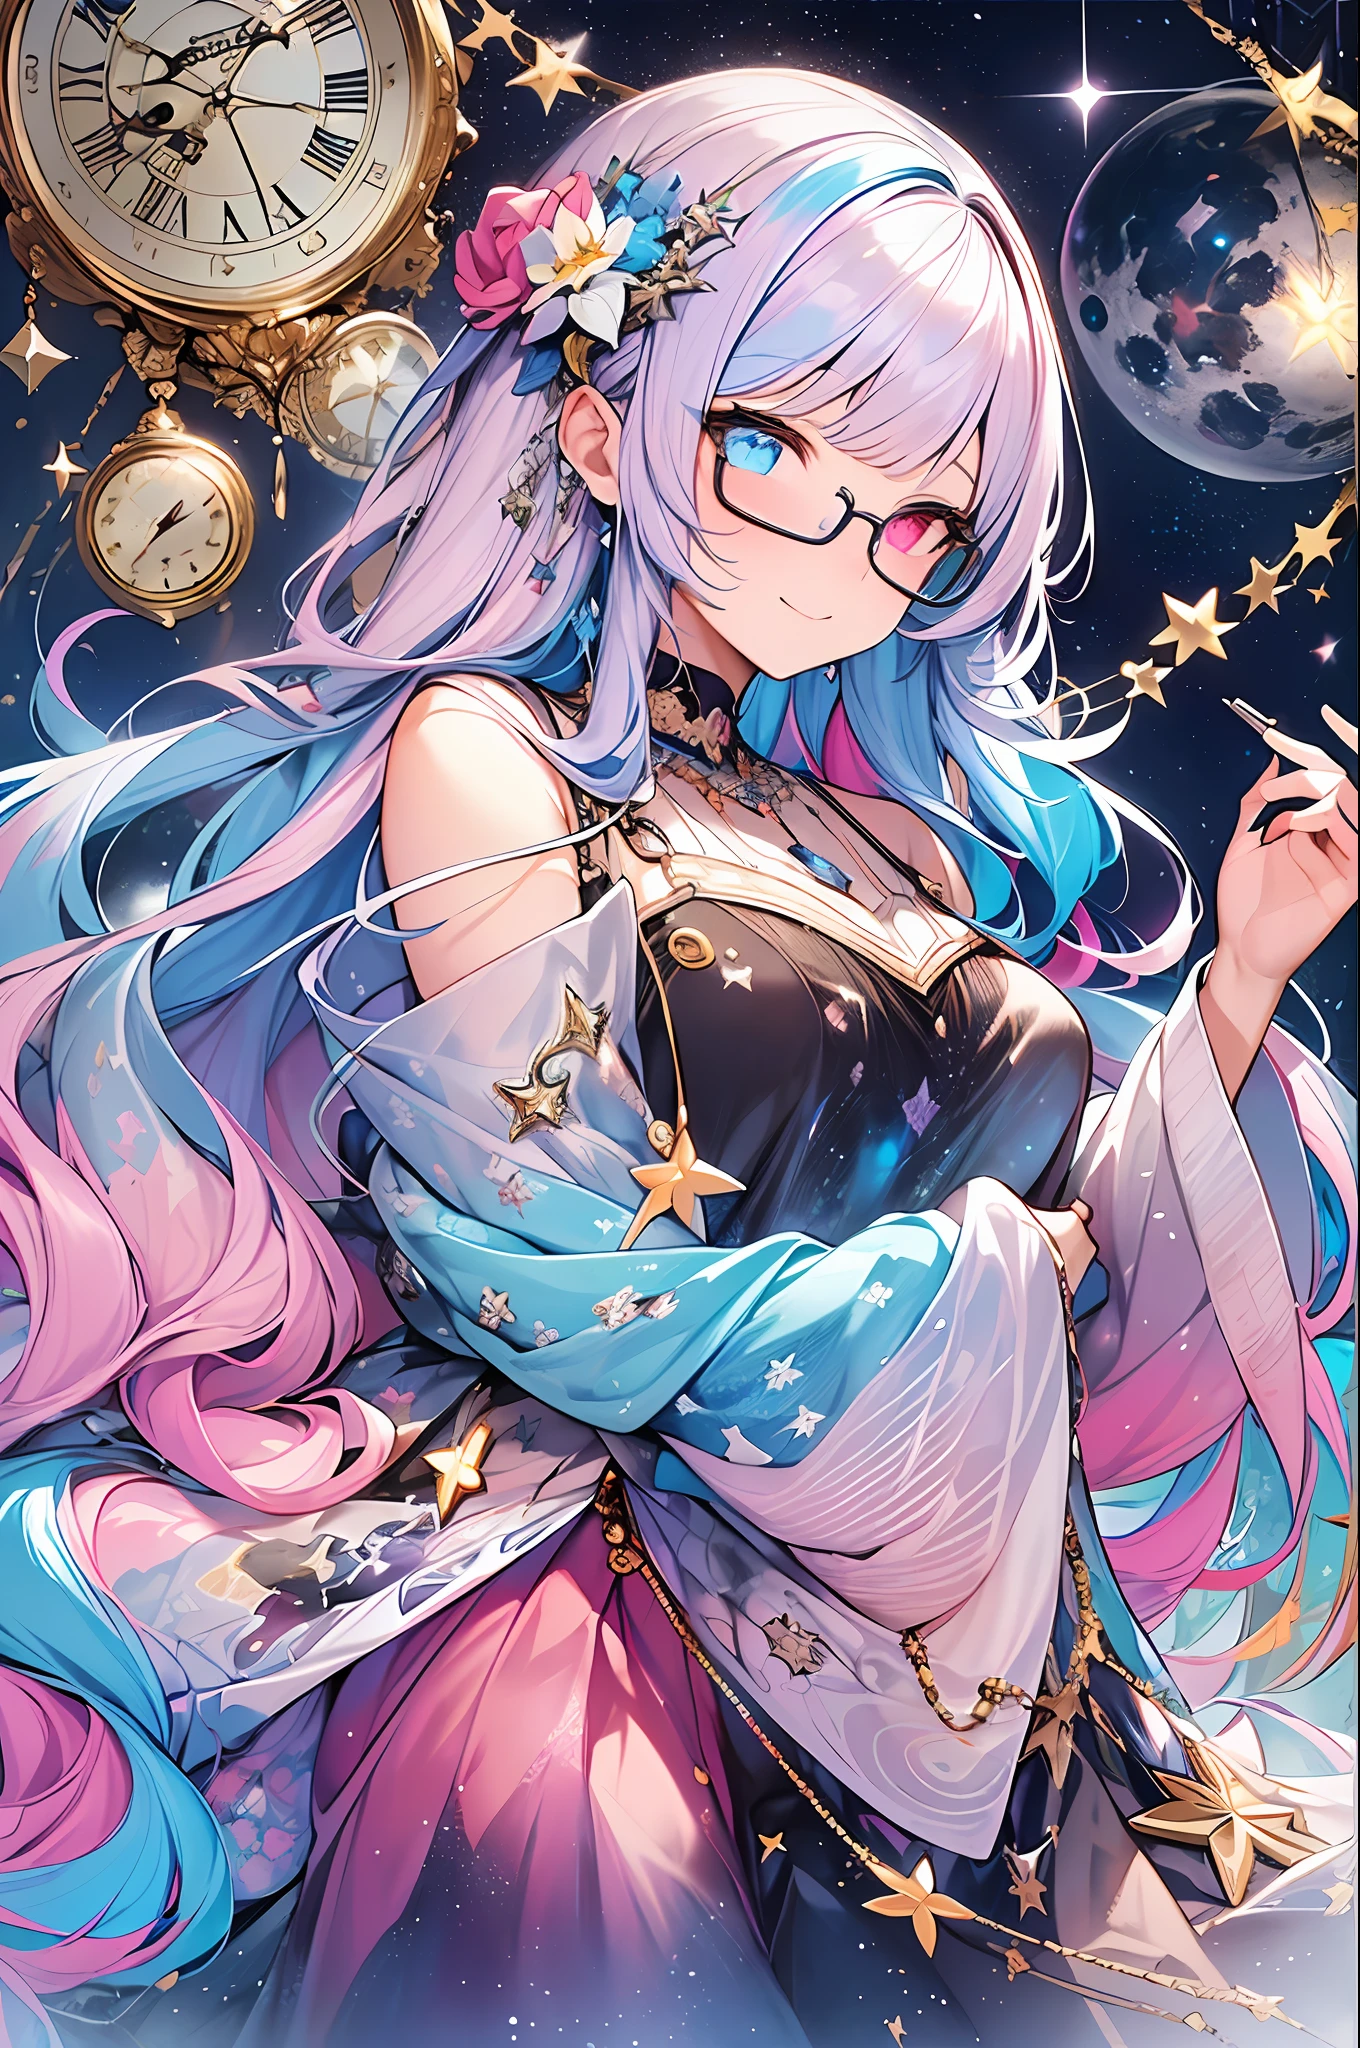 (masterpiece, highest quality, highest quality, watercolor art (pendant), official art, beautiful and aesthetic, (1.2), (1 girl: 1.3), (fractal art: 1.3), full body, star-shaped pupil, , pattern, ((iridescent hair, colorful hair, half blue and half pink hair: 1.2)), ((iridescent background)), liquid, cloud, colorful, moonlit, stars, smile, glasses, writing, heterochromia, ( Colorful: 1.5), galaxy, stars, clock, big clock,